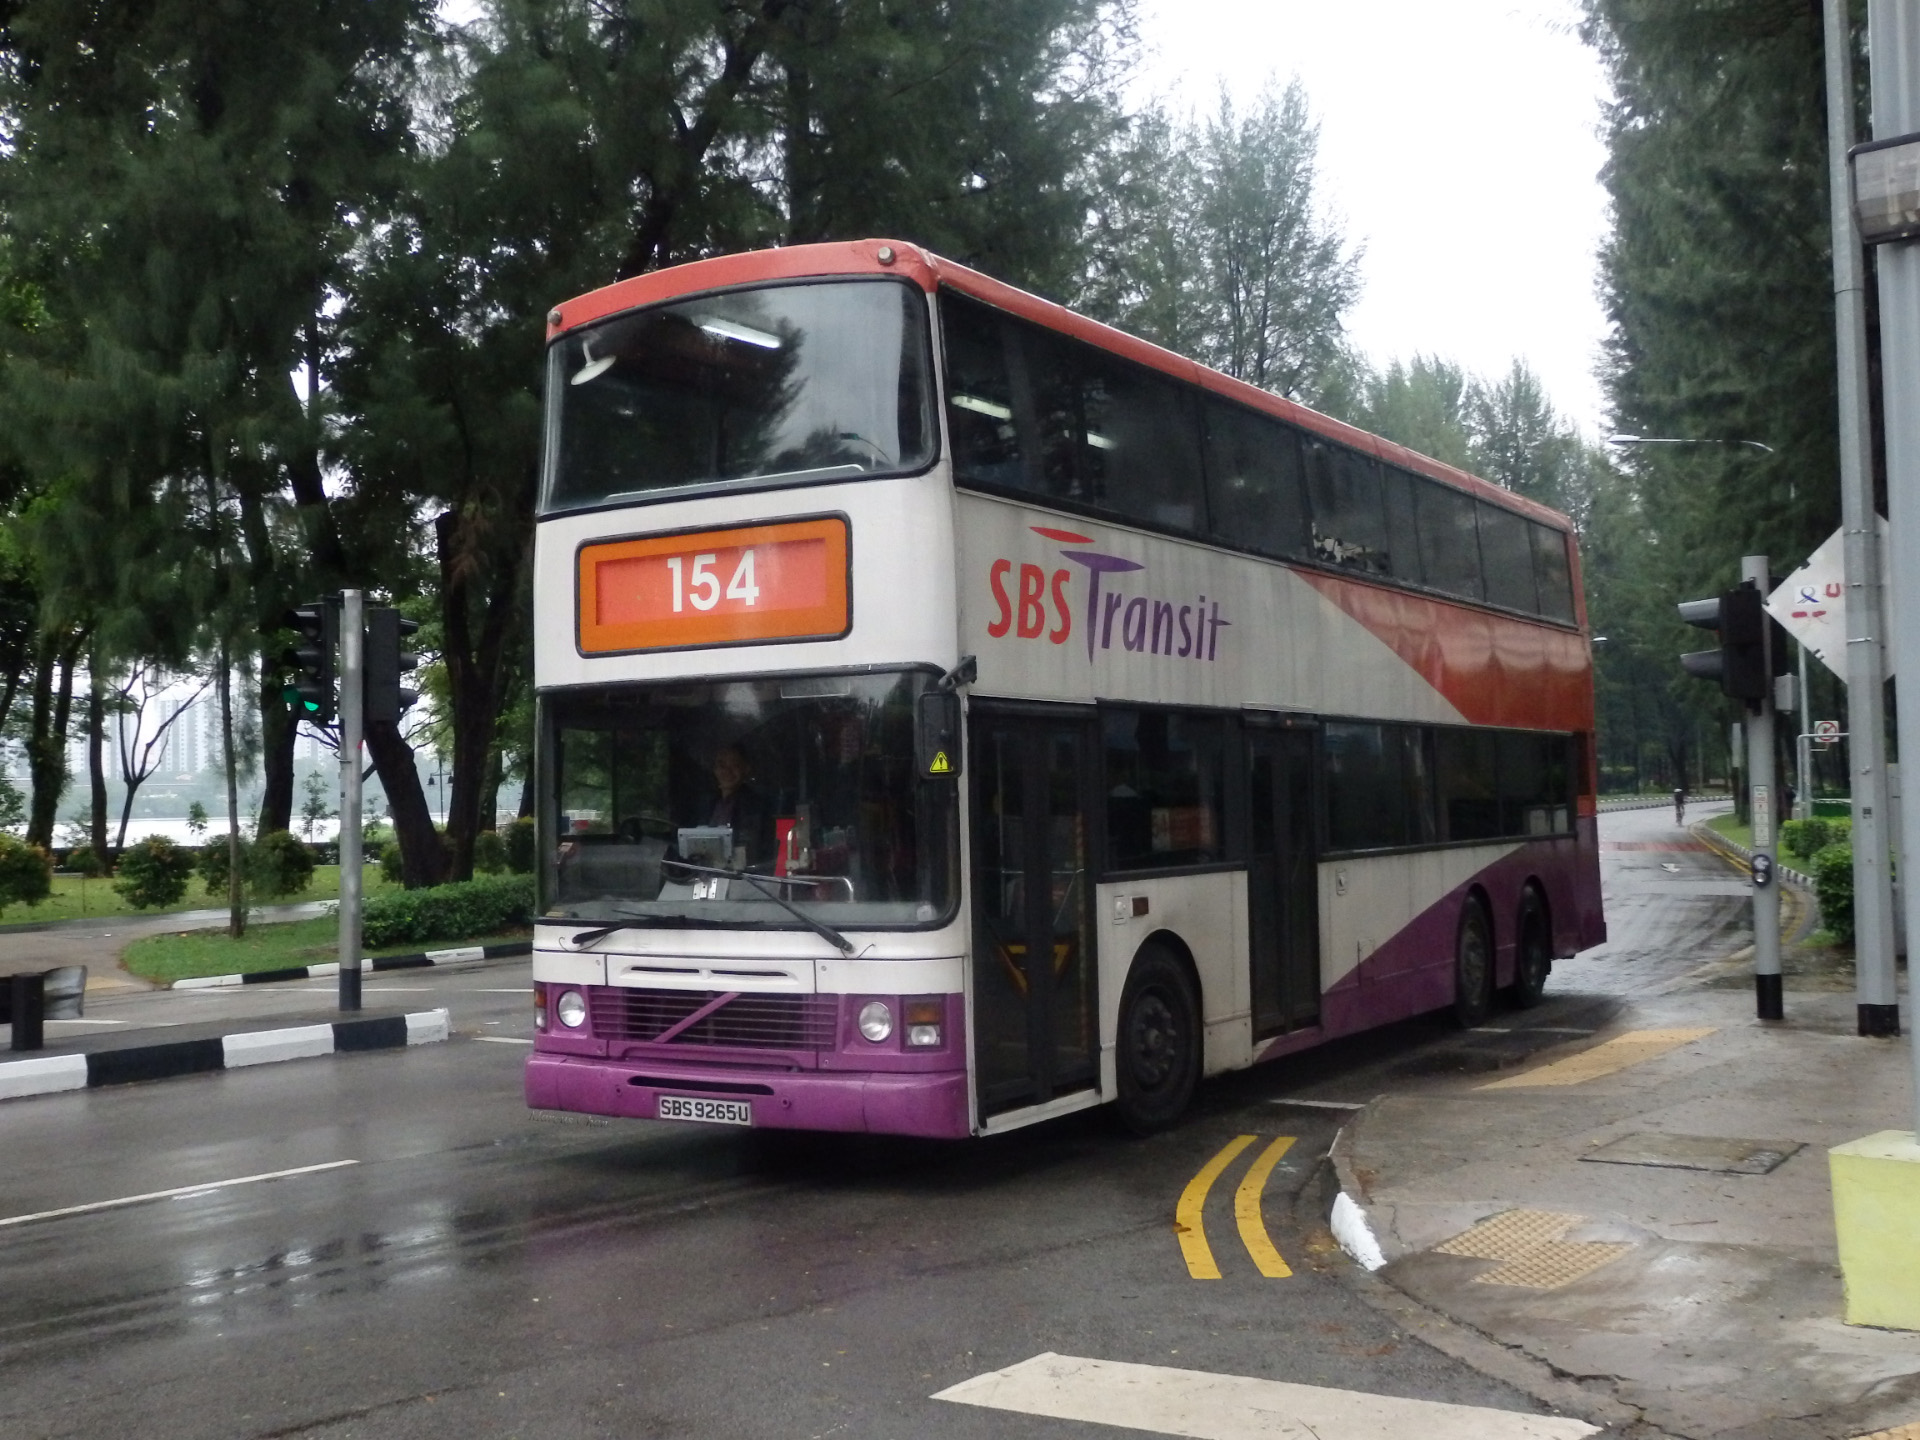 a double decker bus is parked on the side of the road